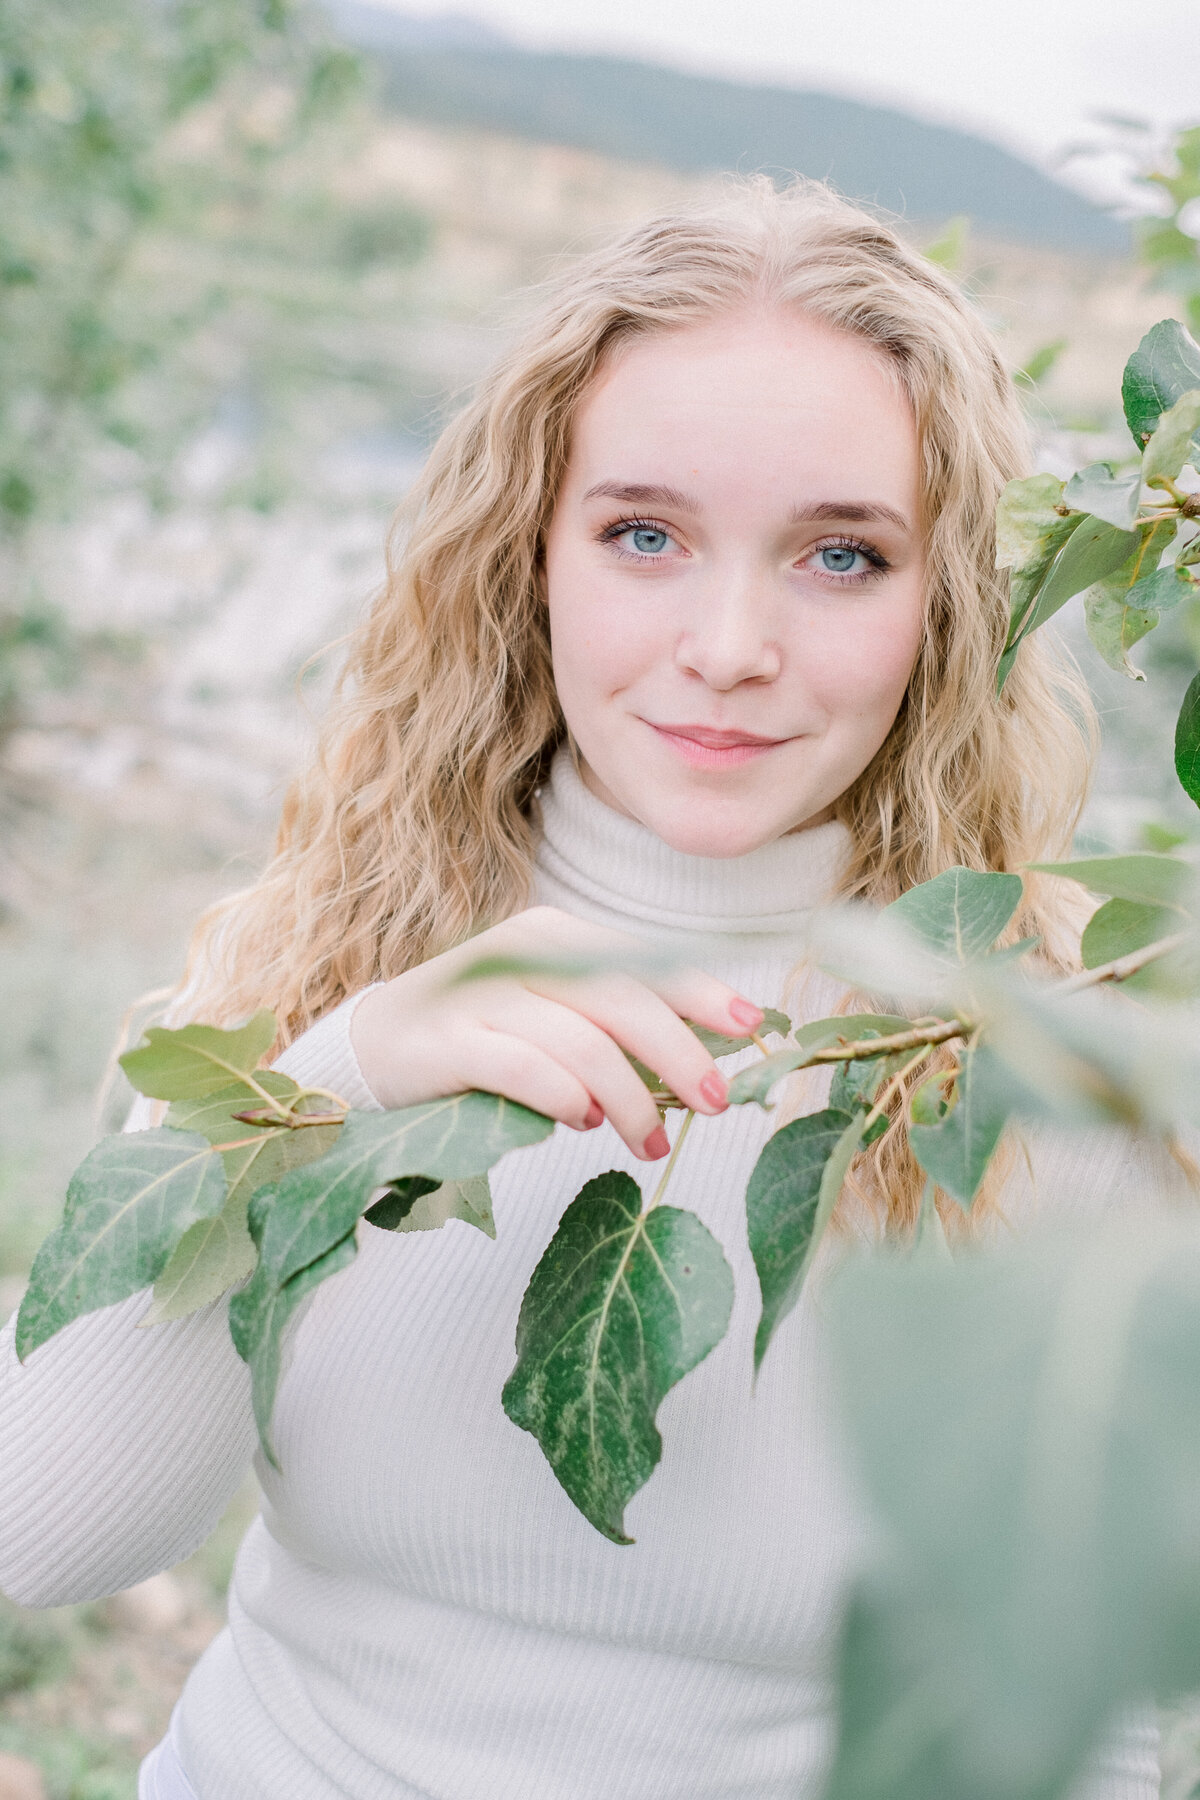 high school senior holding leaves while looking at the camera - taken by spokane senior photographer